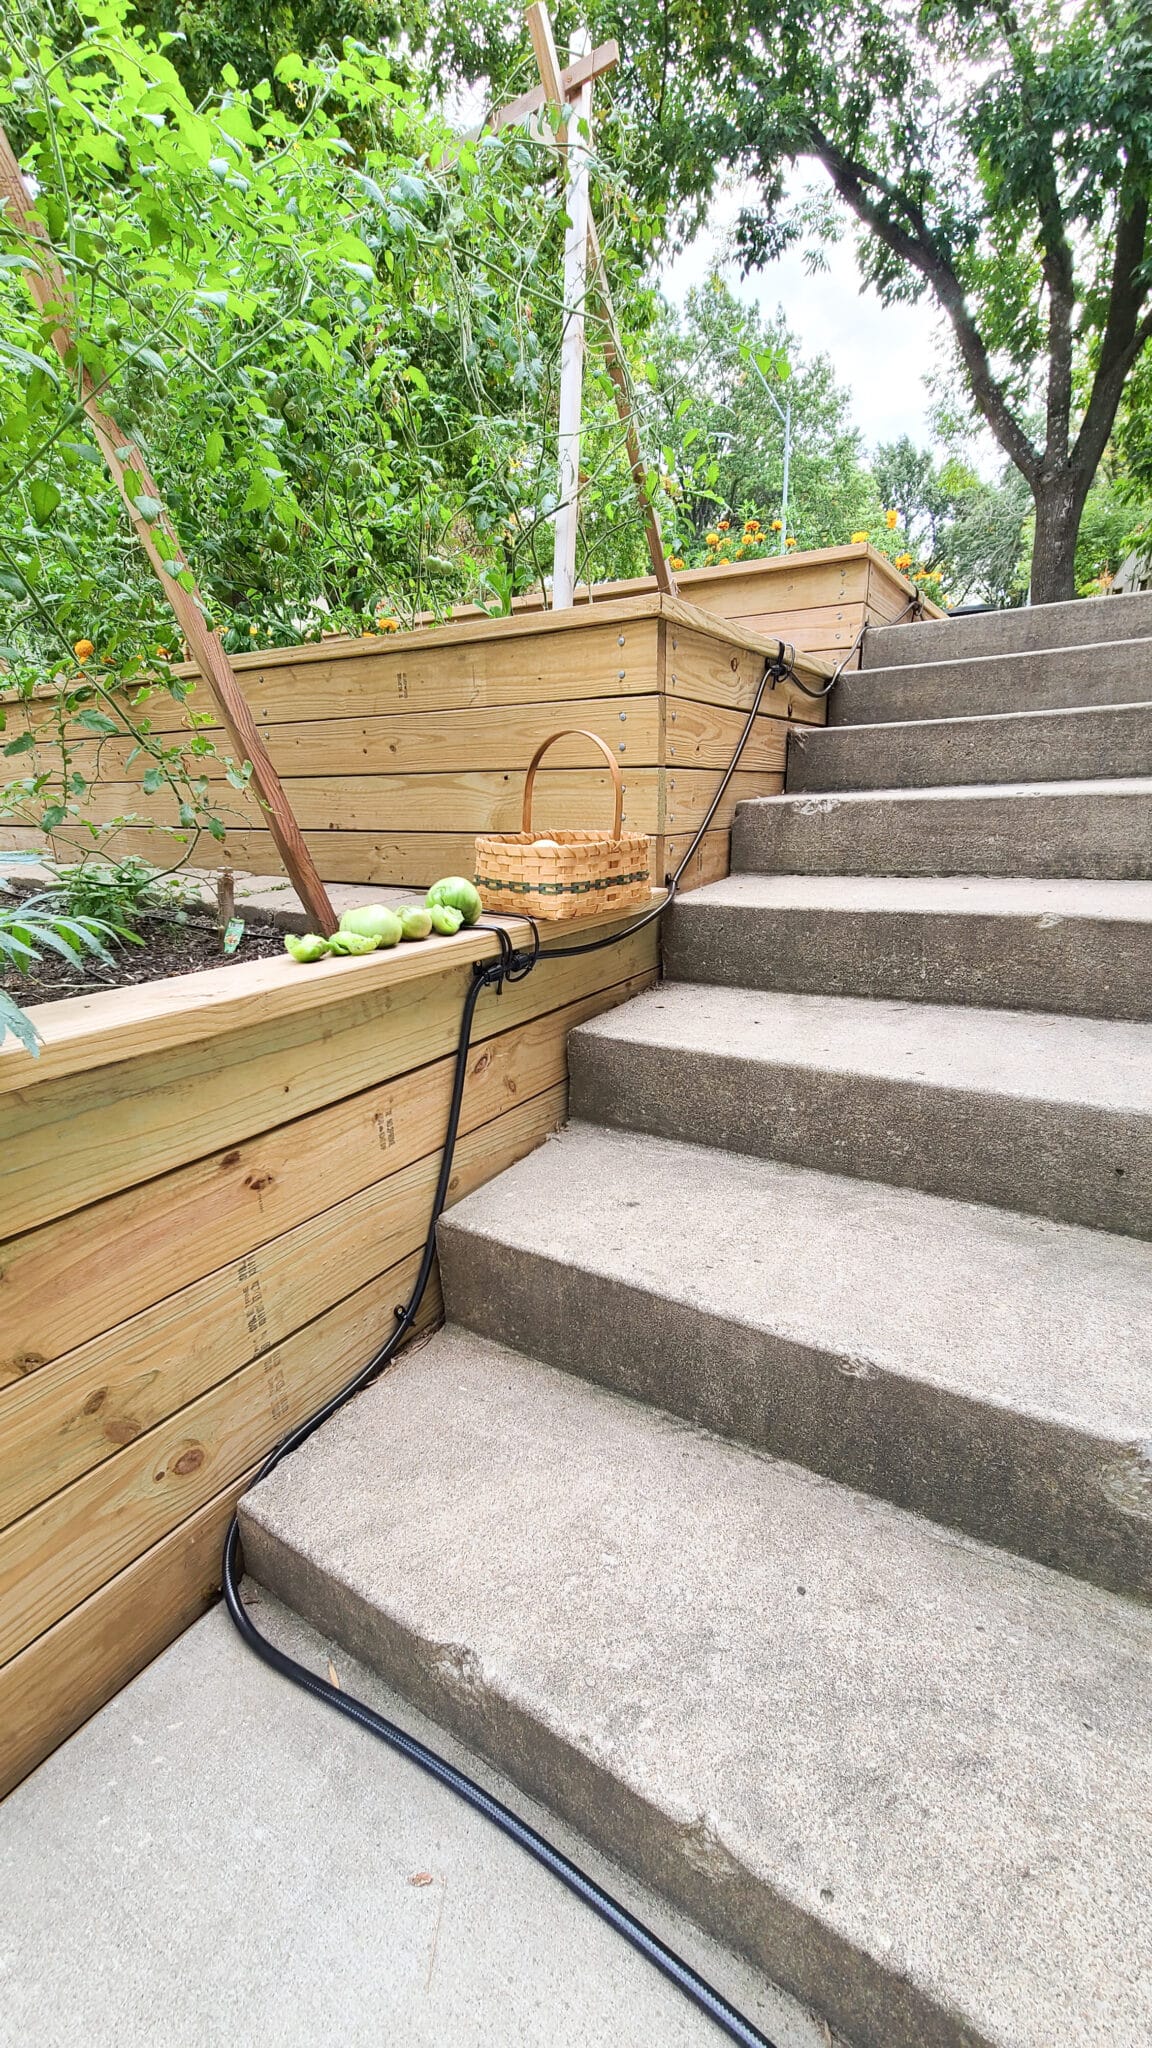 flexible irrigation line running along stairs for the terraced garden beds